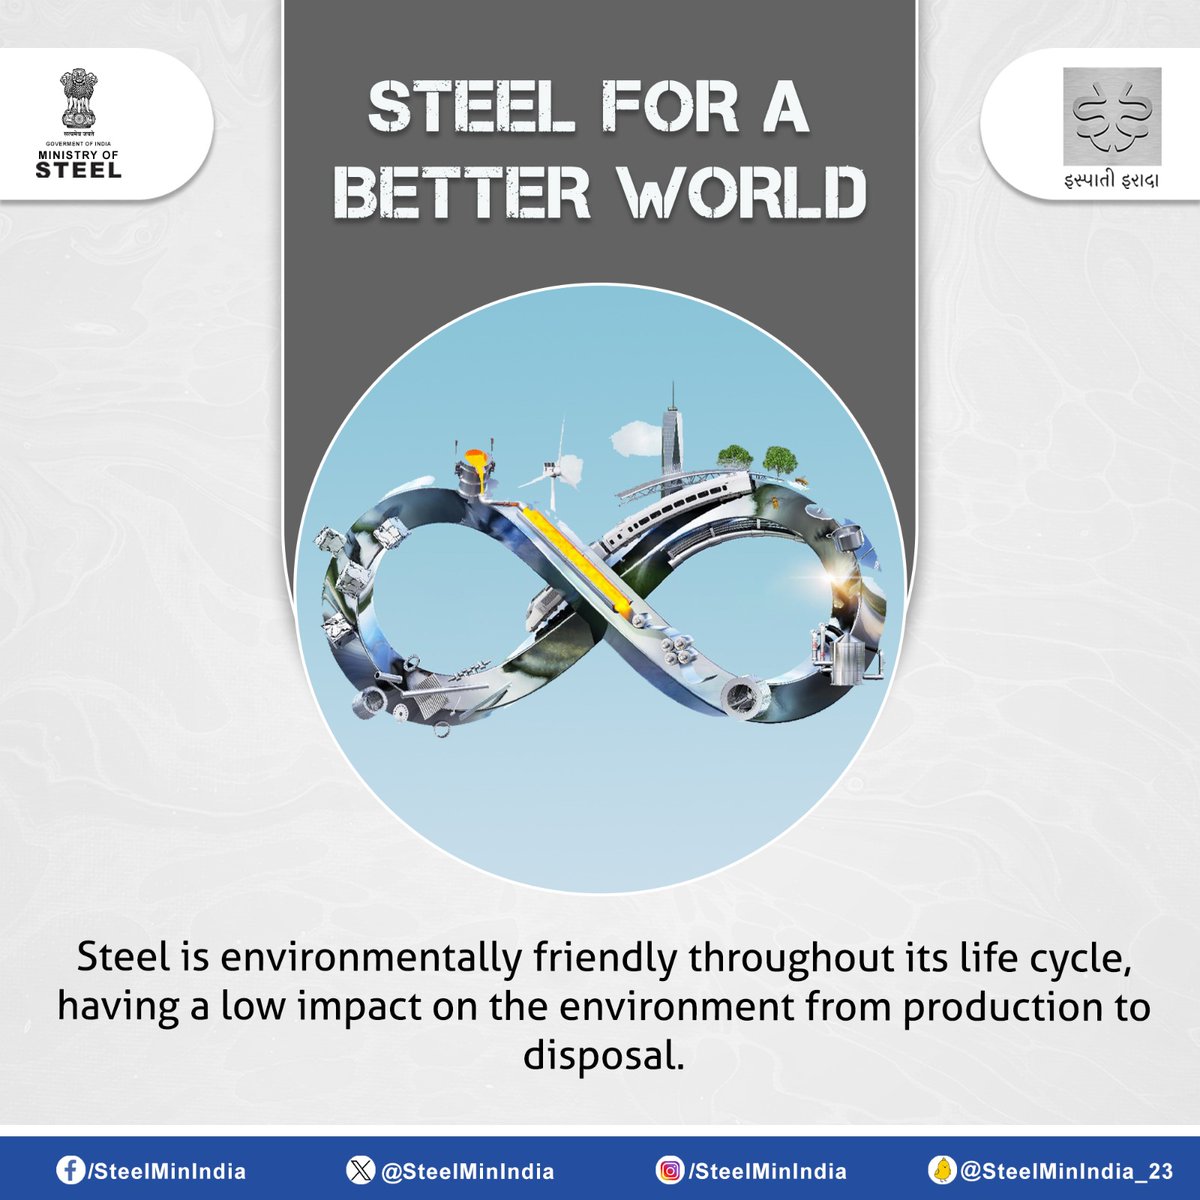 Discover the eco-friendly essence of steel in our journey towards a better world. From its recyclability to its durability, steel is shaping a sustainable future. Let's build greener together!🌱🏗️

#SteelForABetterWorld #SustainableSteel #IspatiGyan #IspatiIrada